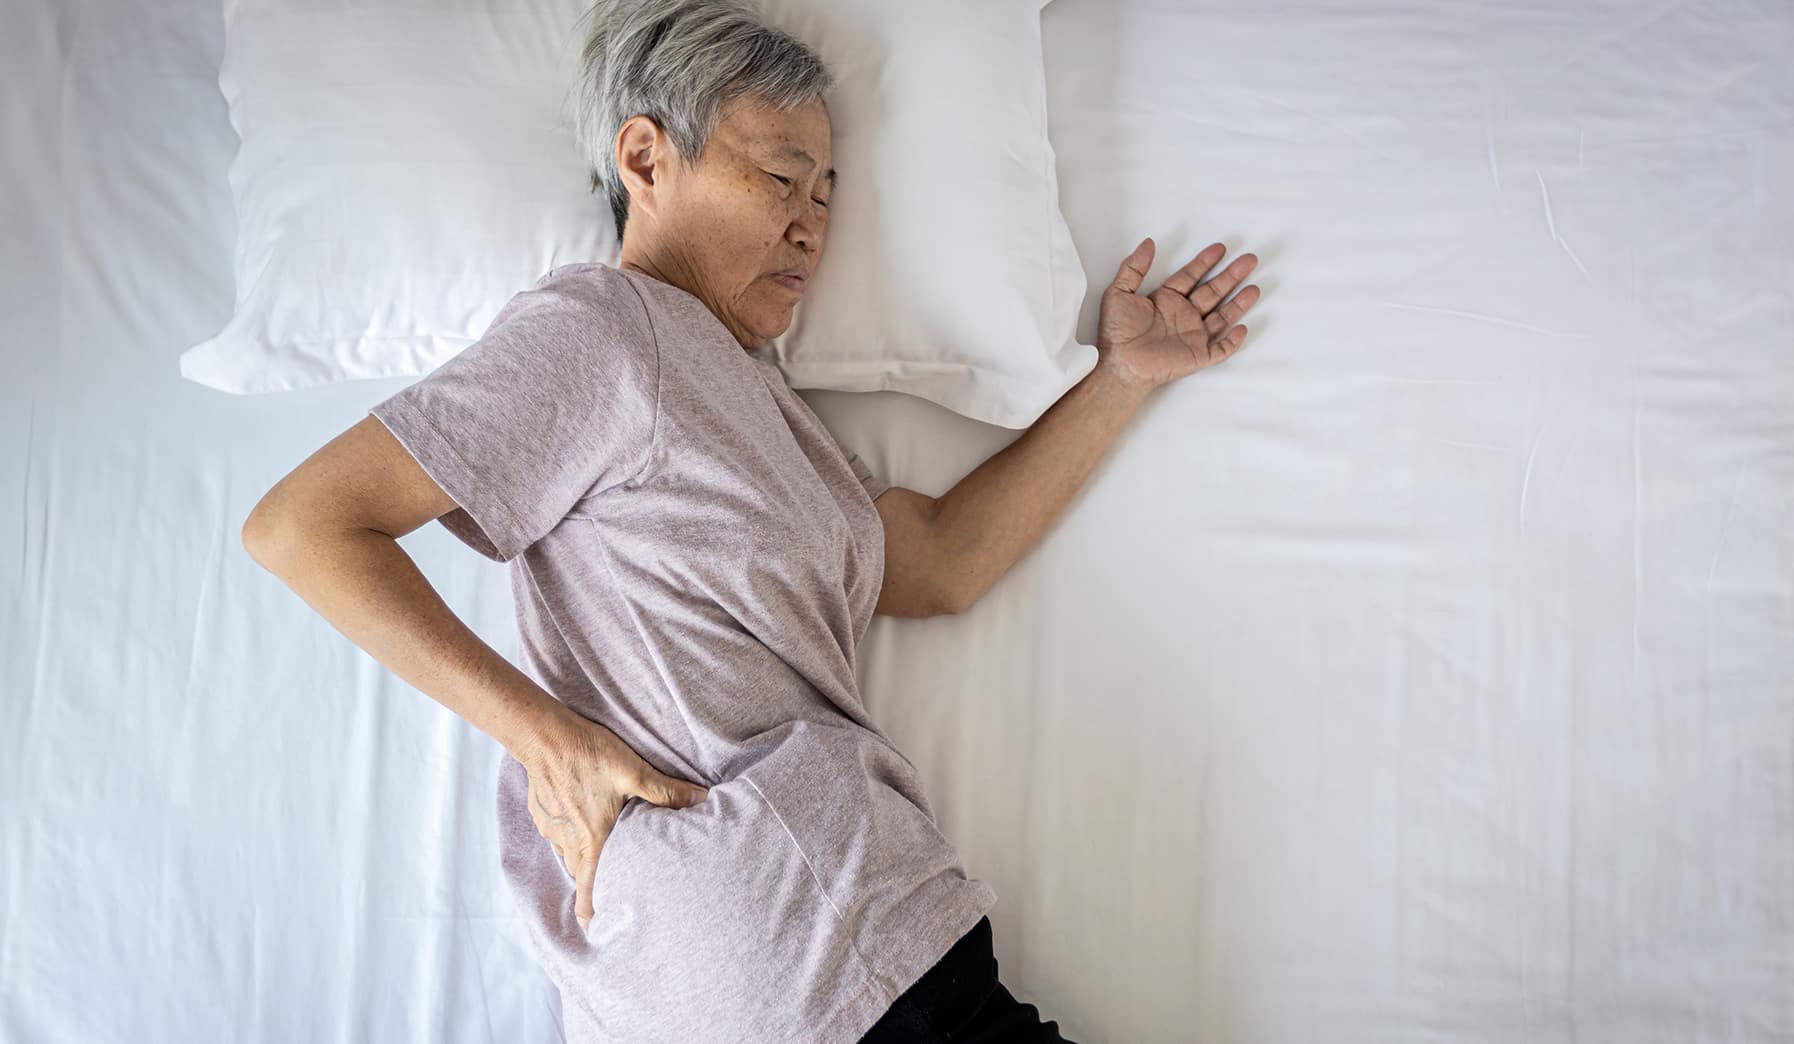 Learn how sleeping better can help improve bone health from the Better Sleep Council.